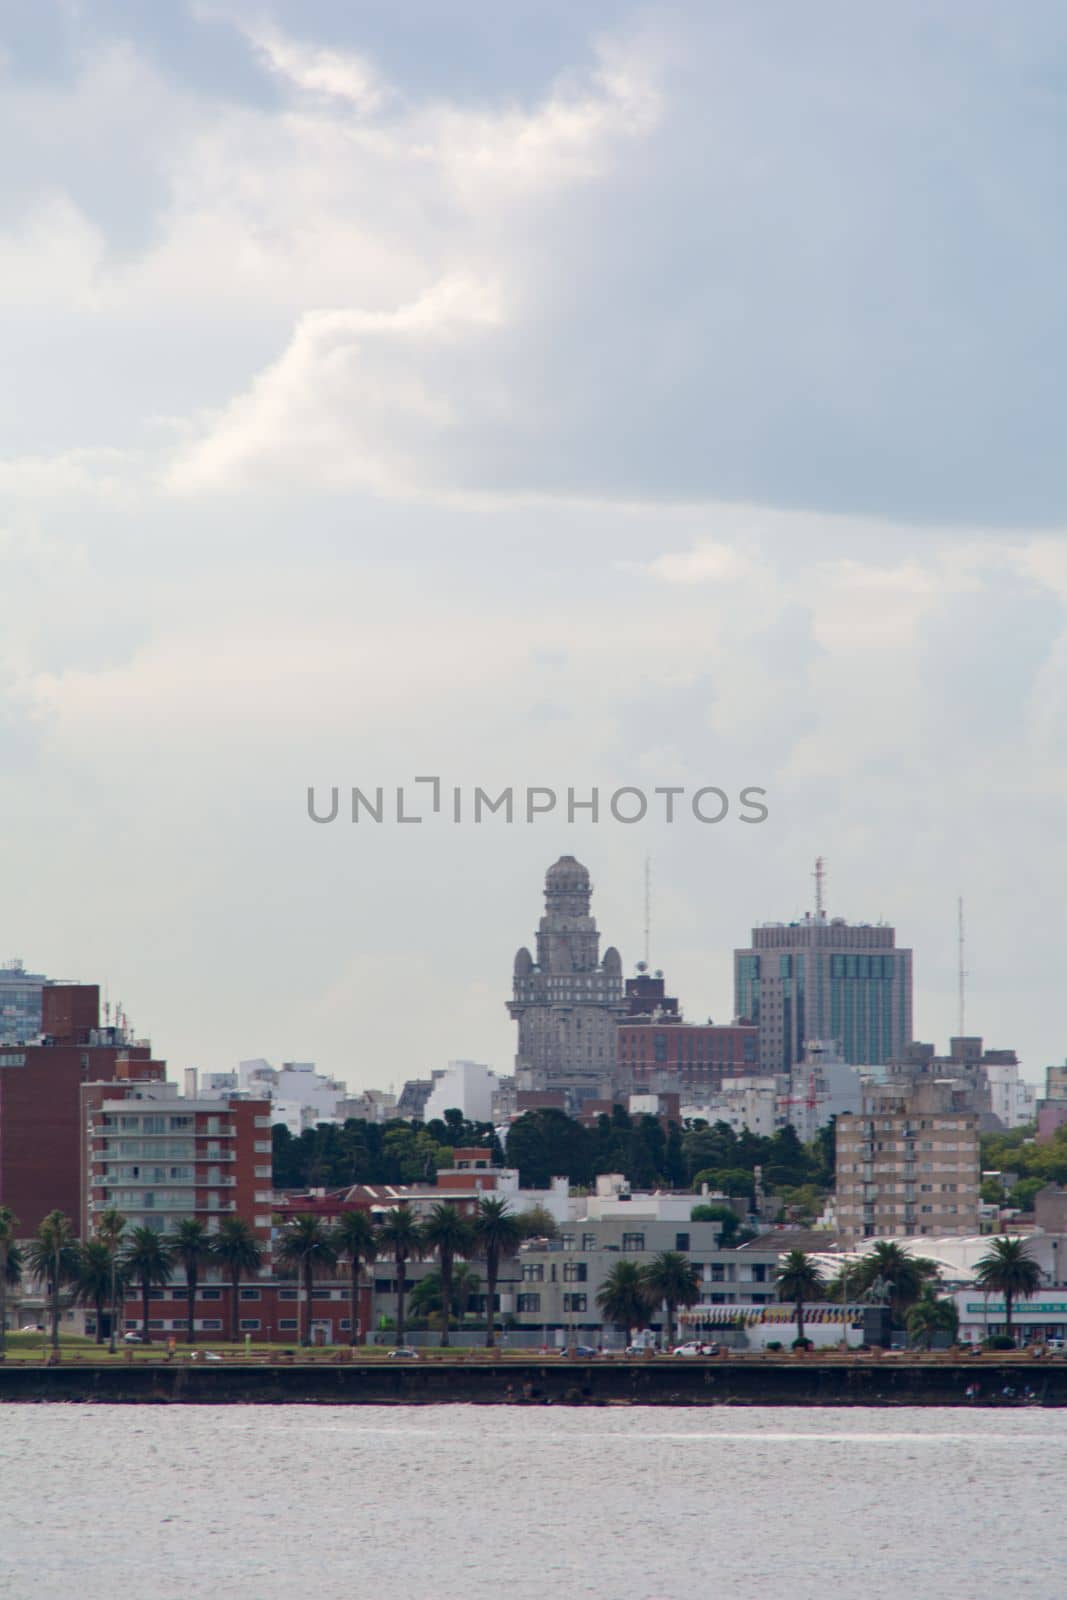 Cityscape in Montevideo, Uruguay by martinscphoto